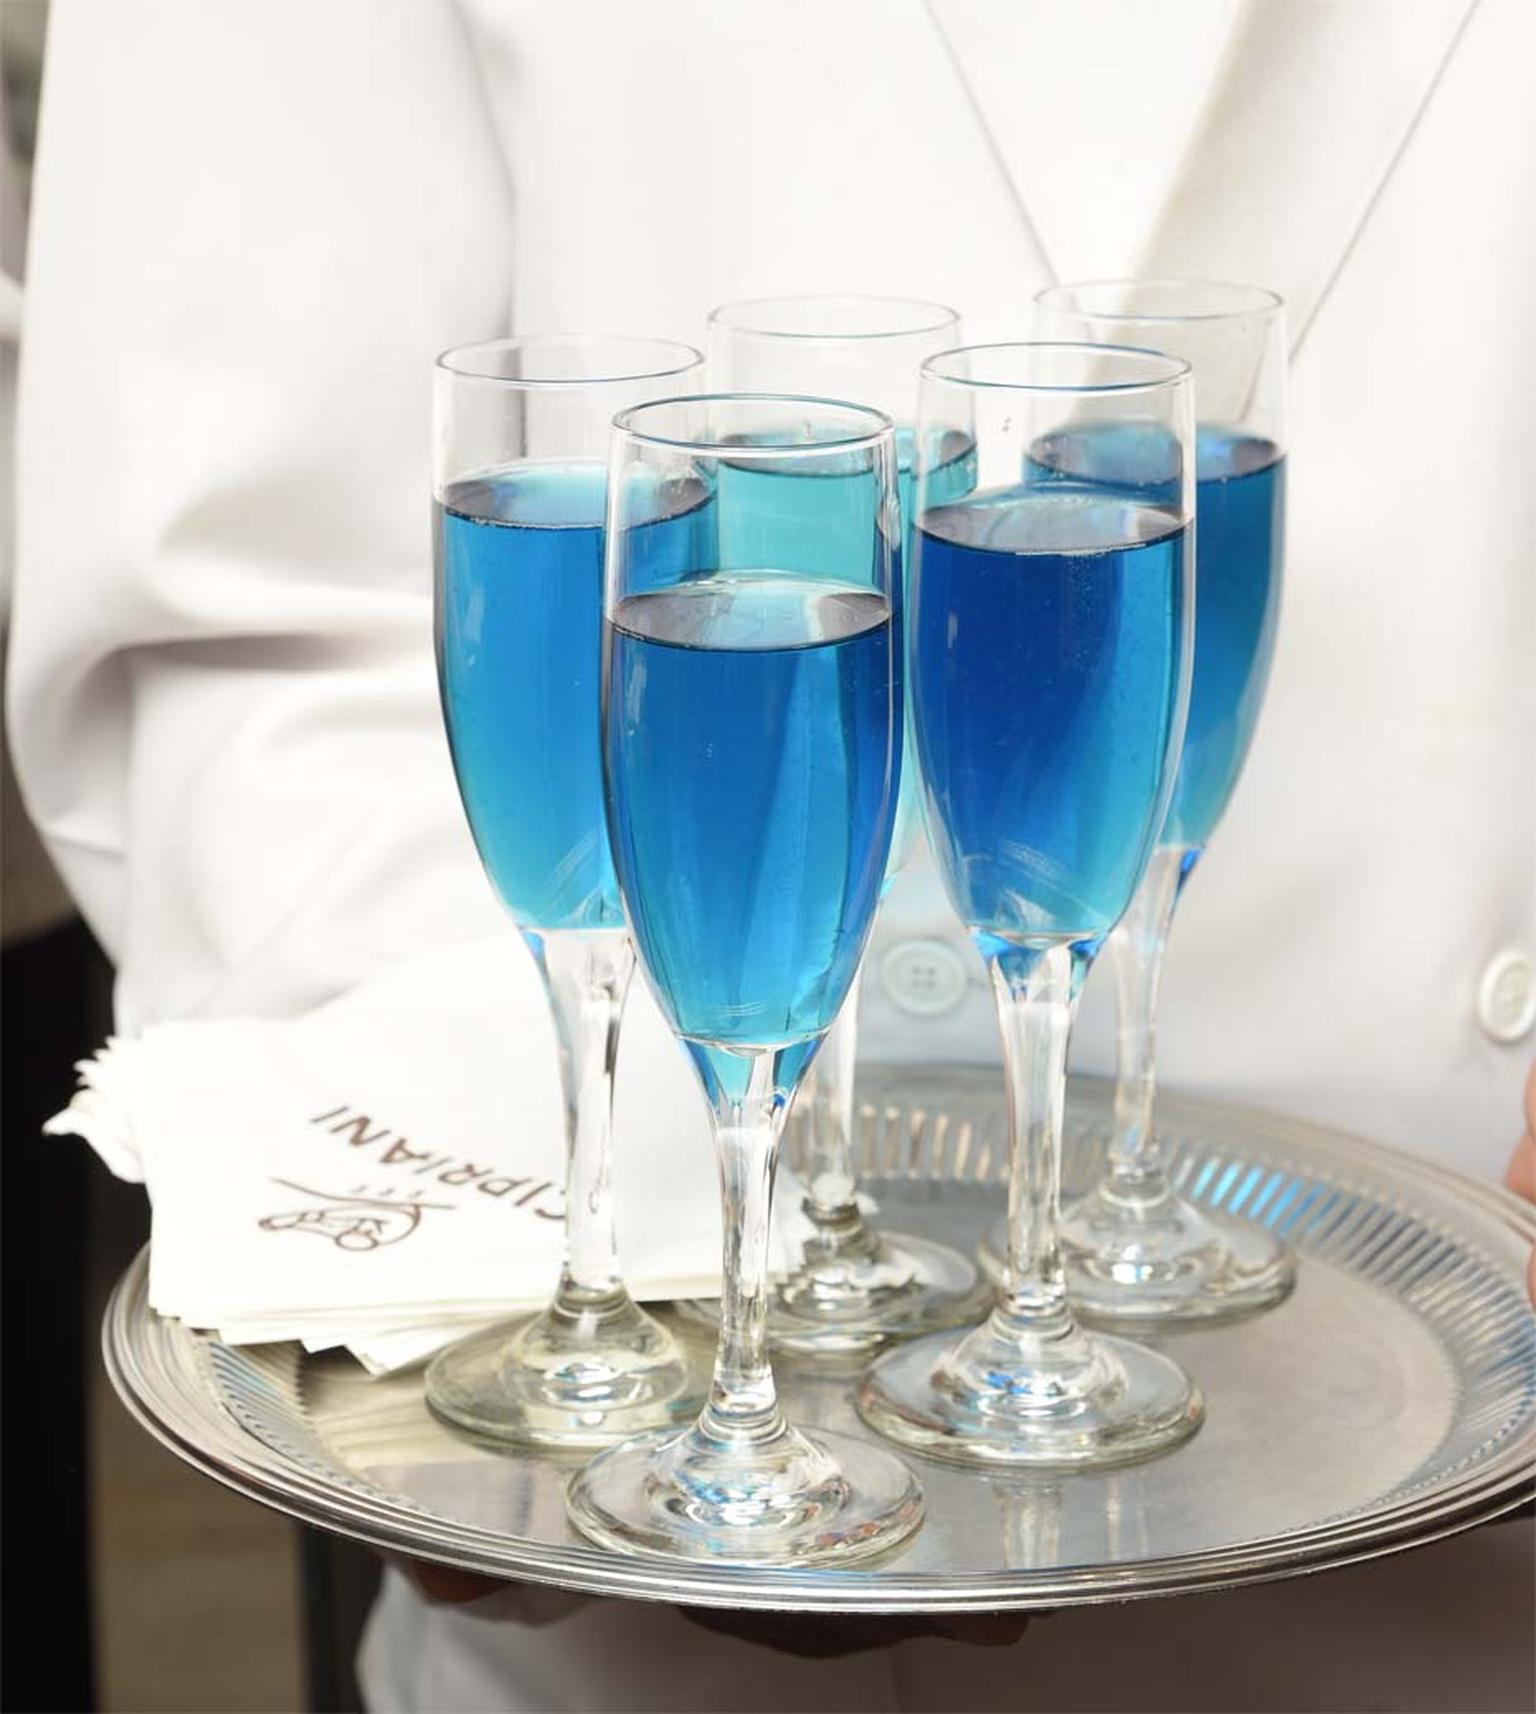 The atmosphere was Timeless Blue at the opening of Buccellati's flagship store in New York.